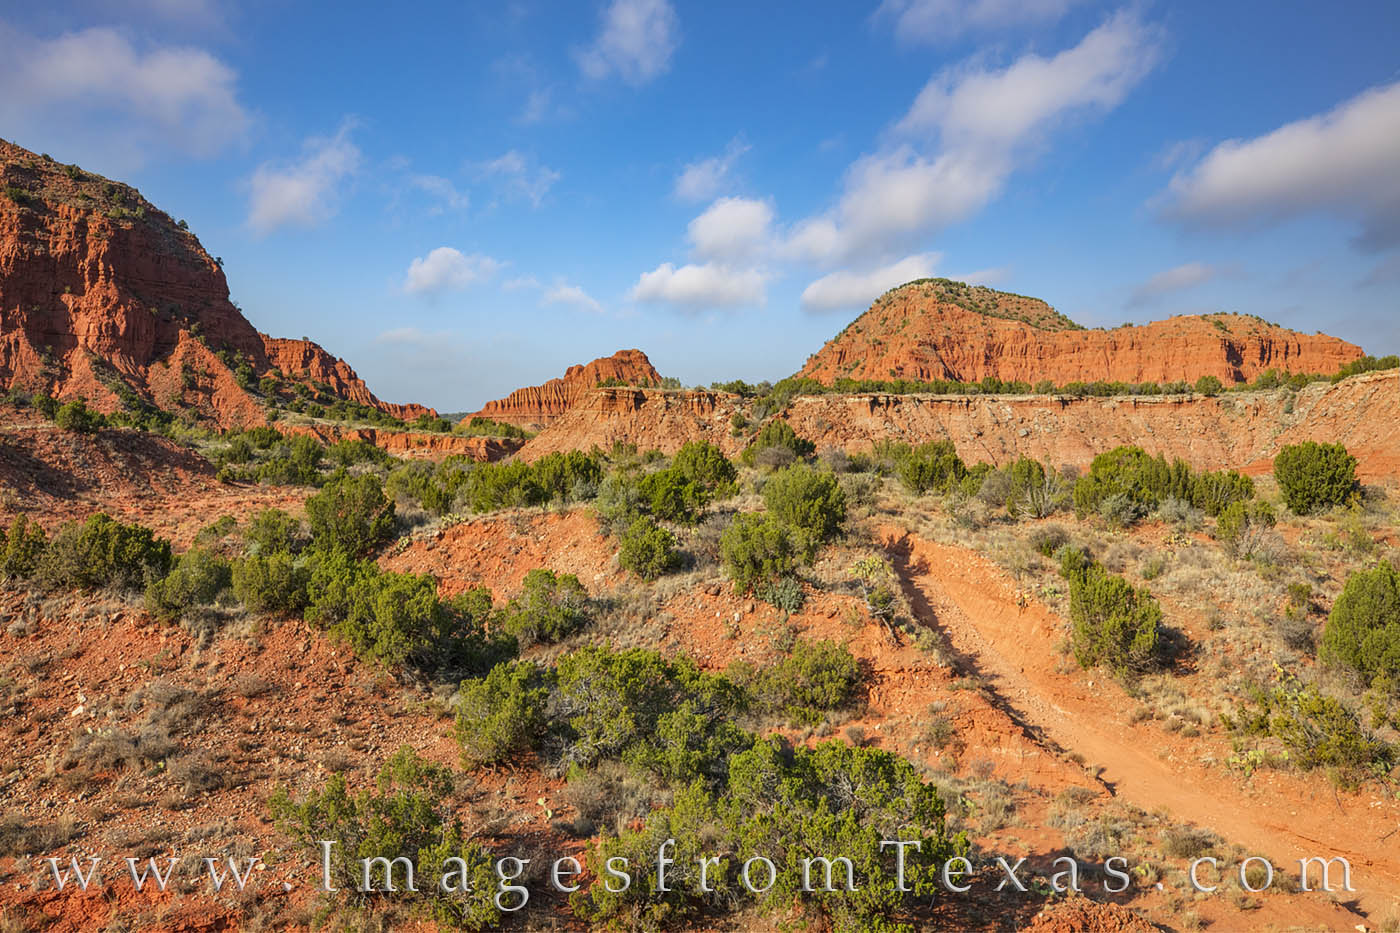 Low morning clouds drift across the west Texas in Caprock Canyons State Park. This remote state park rests at the edge of the...